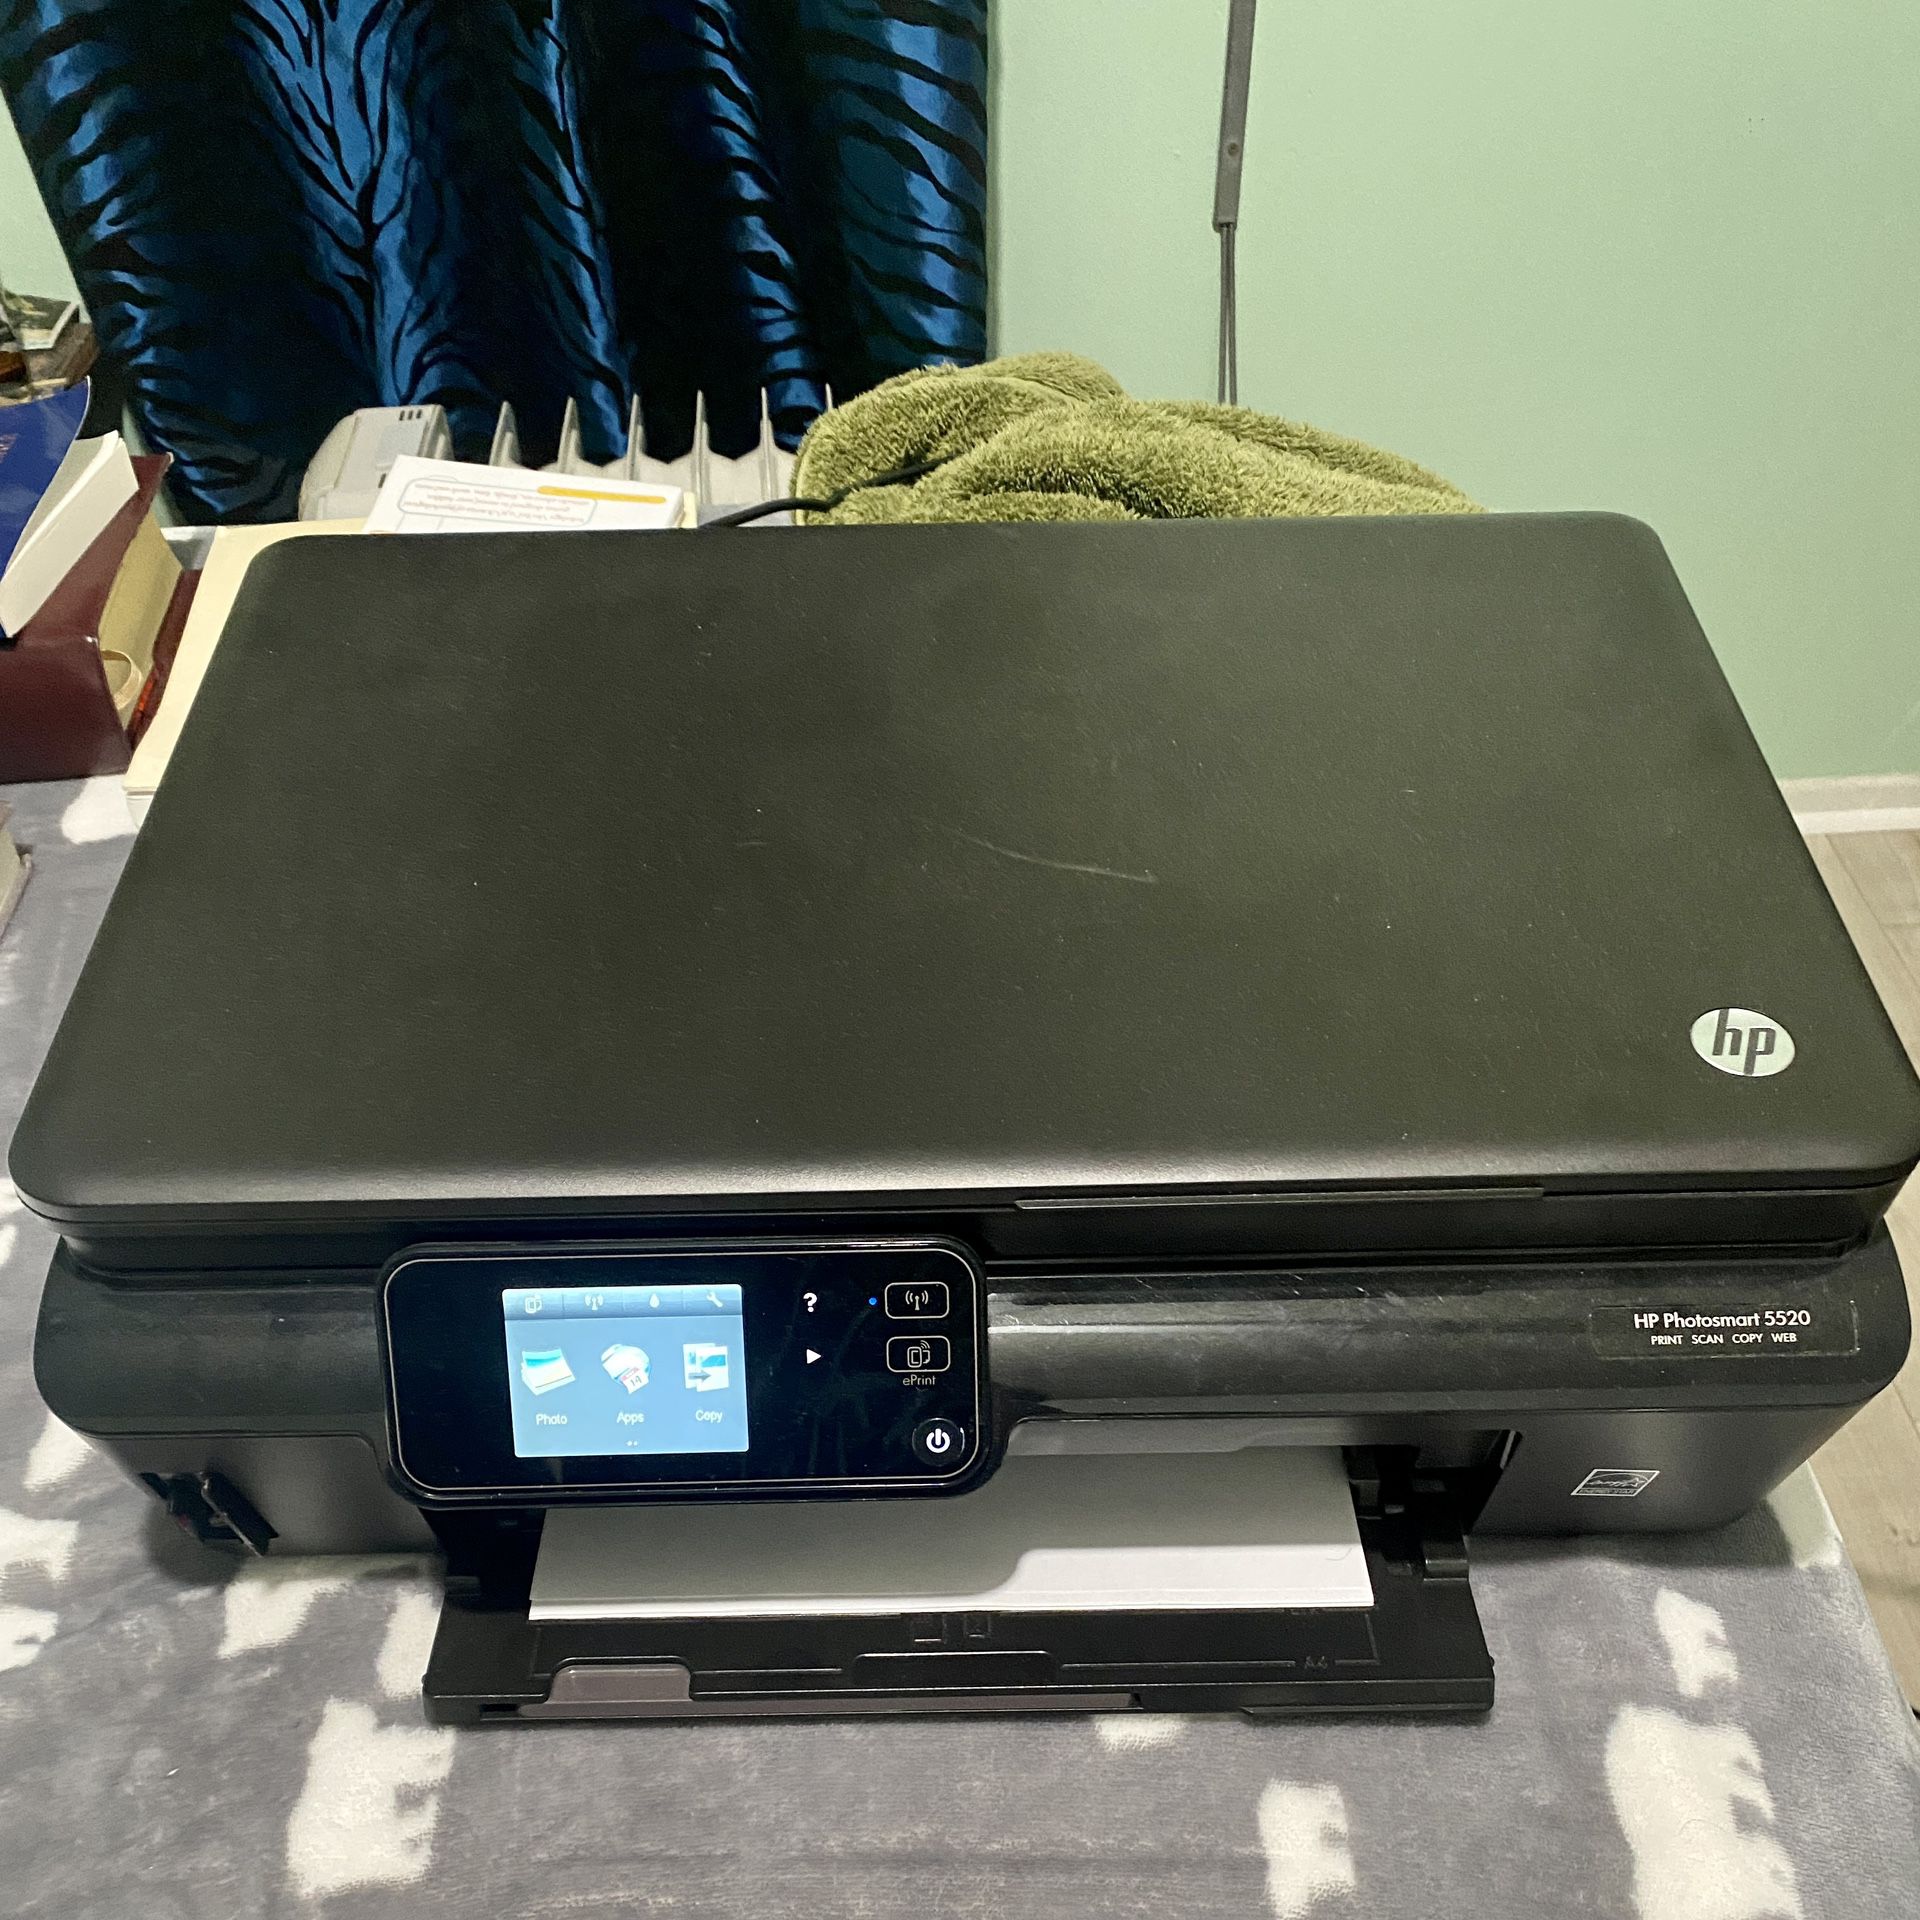 HP 5520 Printer for Sale Los Angeles, CA - OfferUp